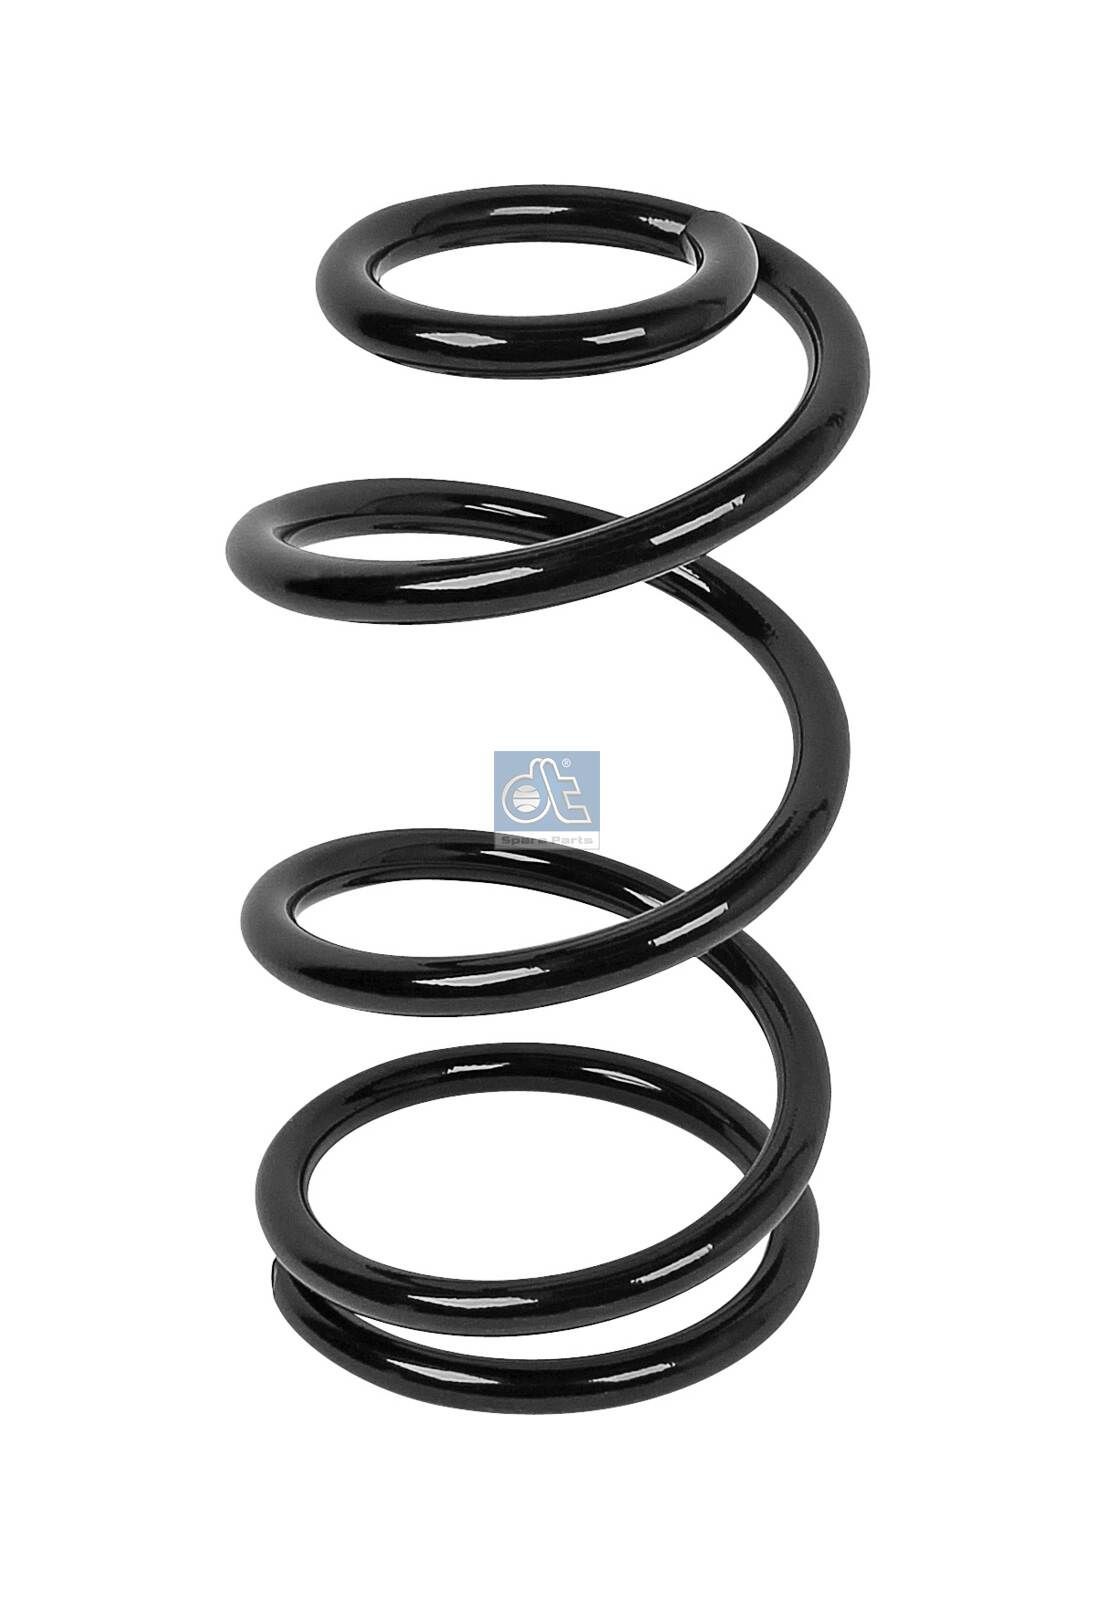 Original 13.17103 DT Spare Parts Springs experience and price